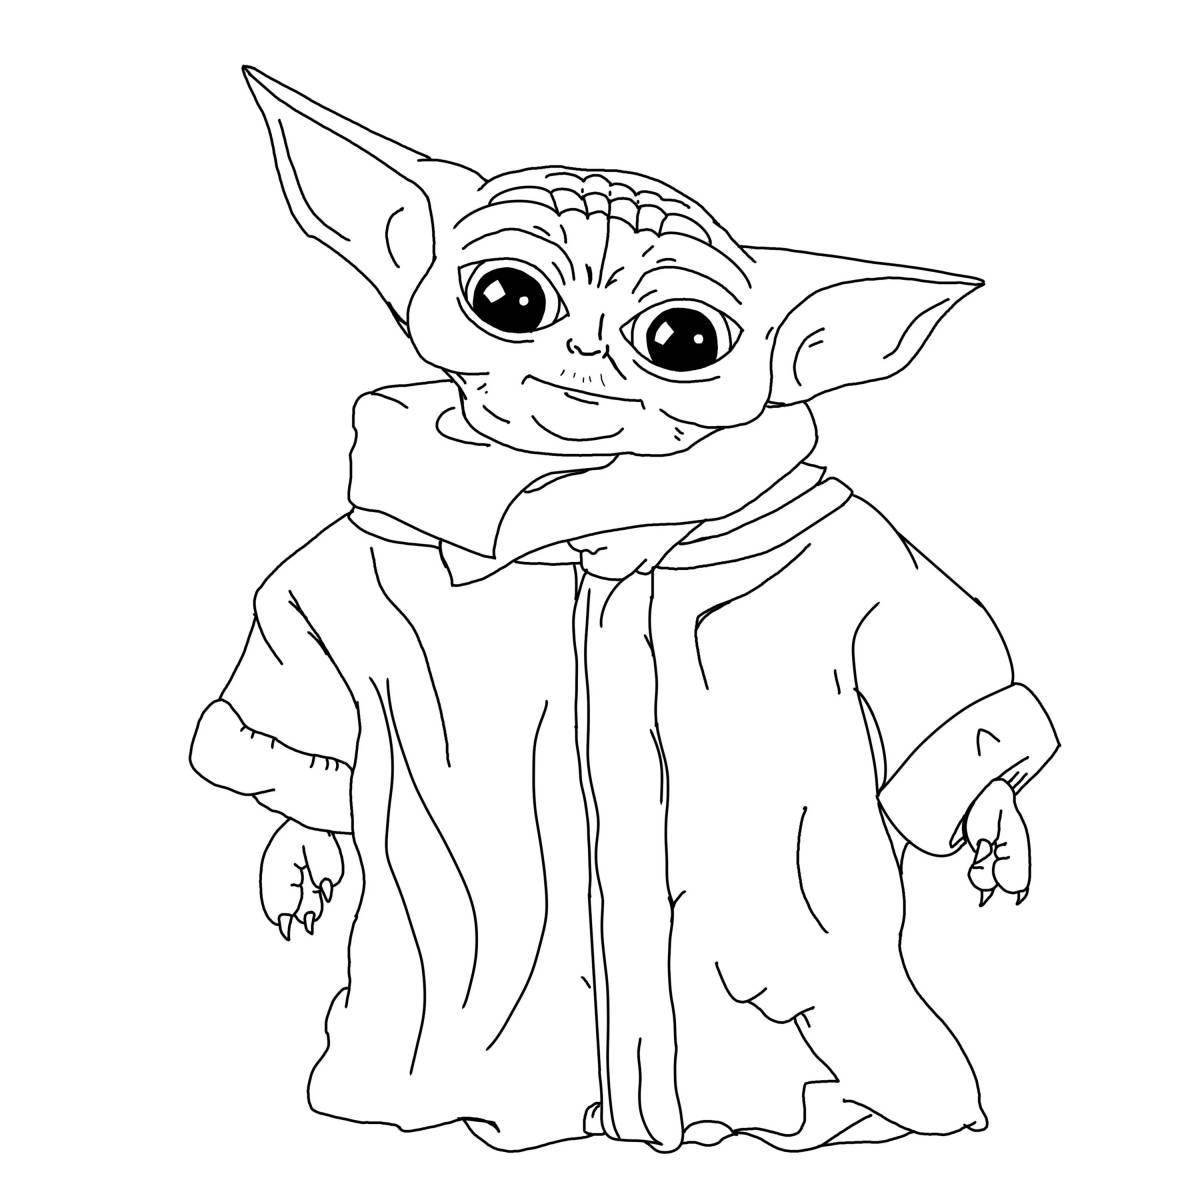 Awesome star wars food coloring page